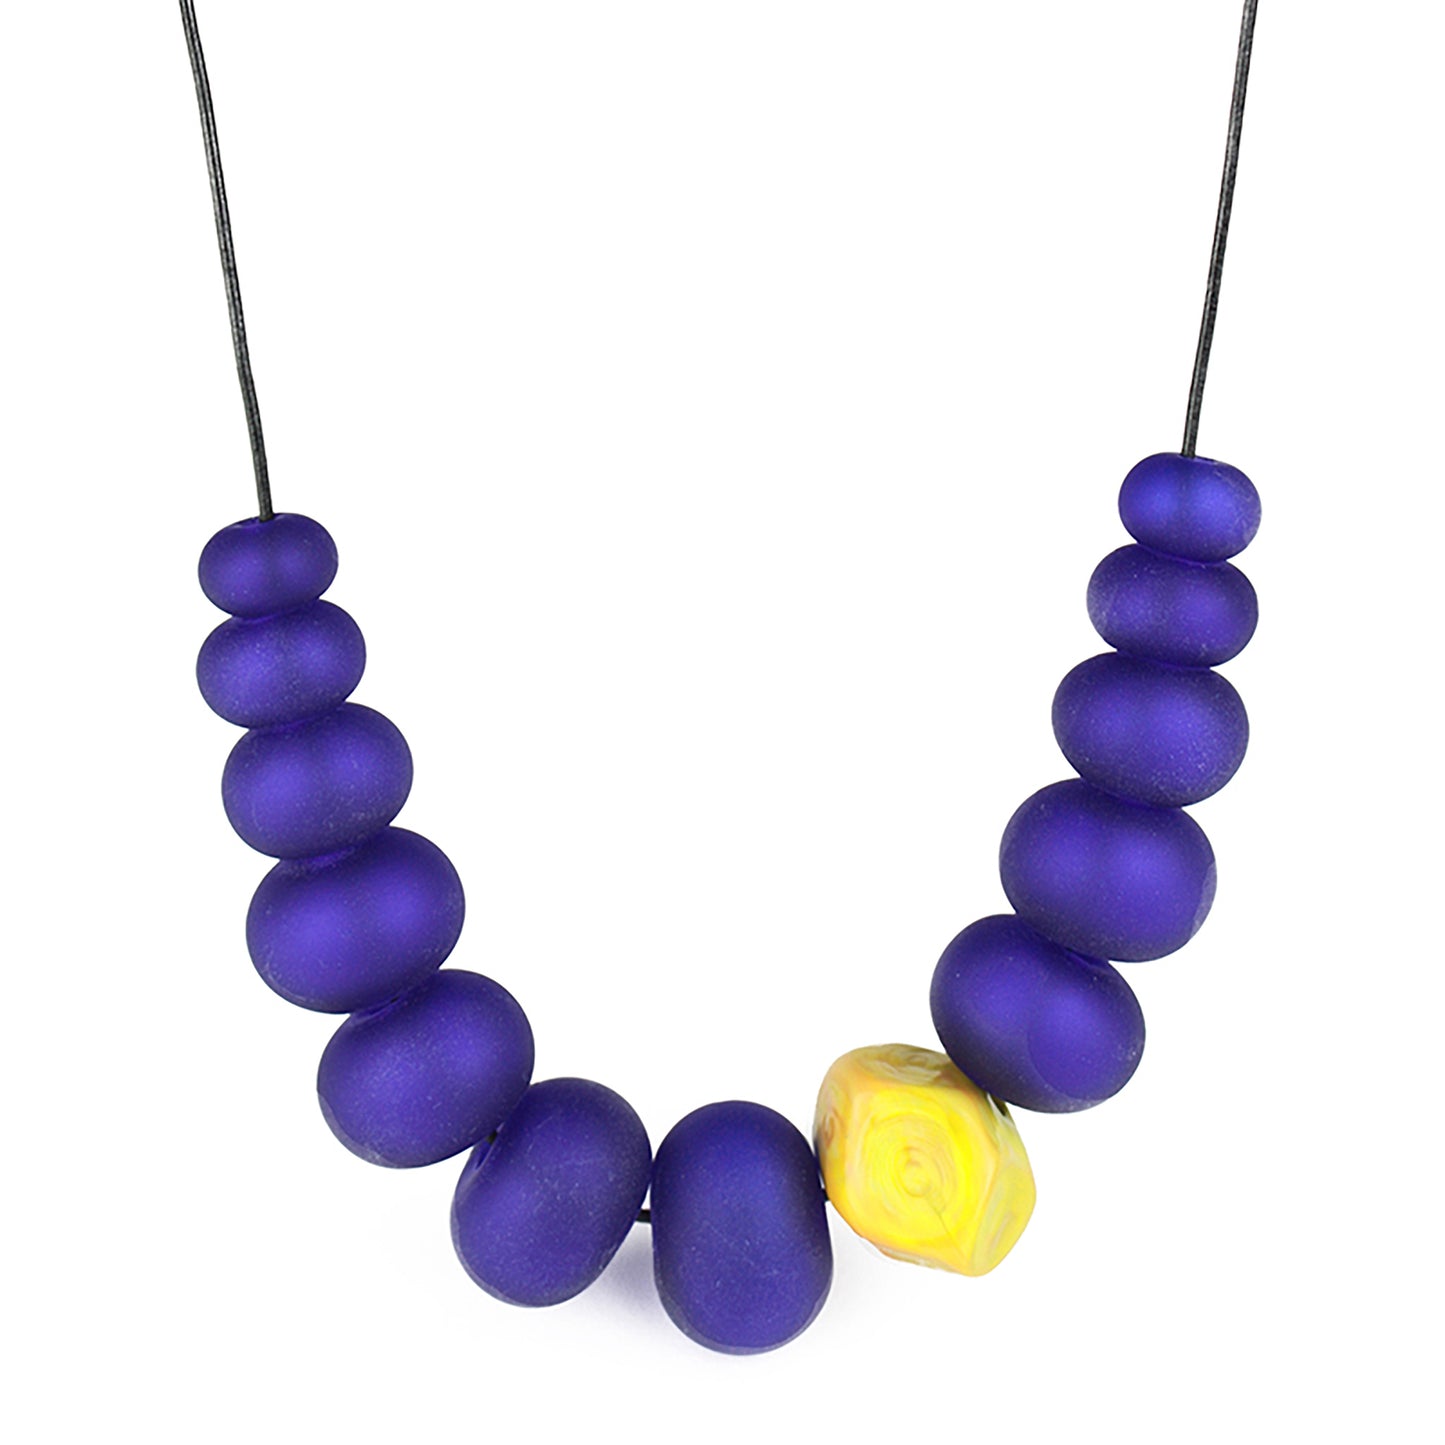 Bubble and nugget necklace - cobalt and ochre yellow